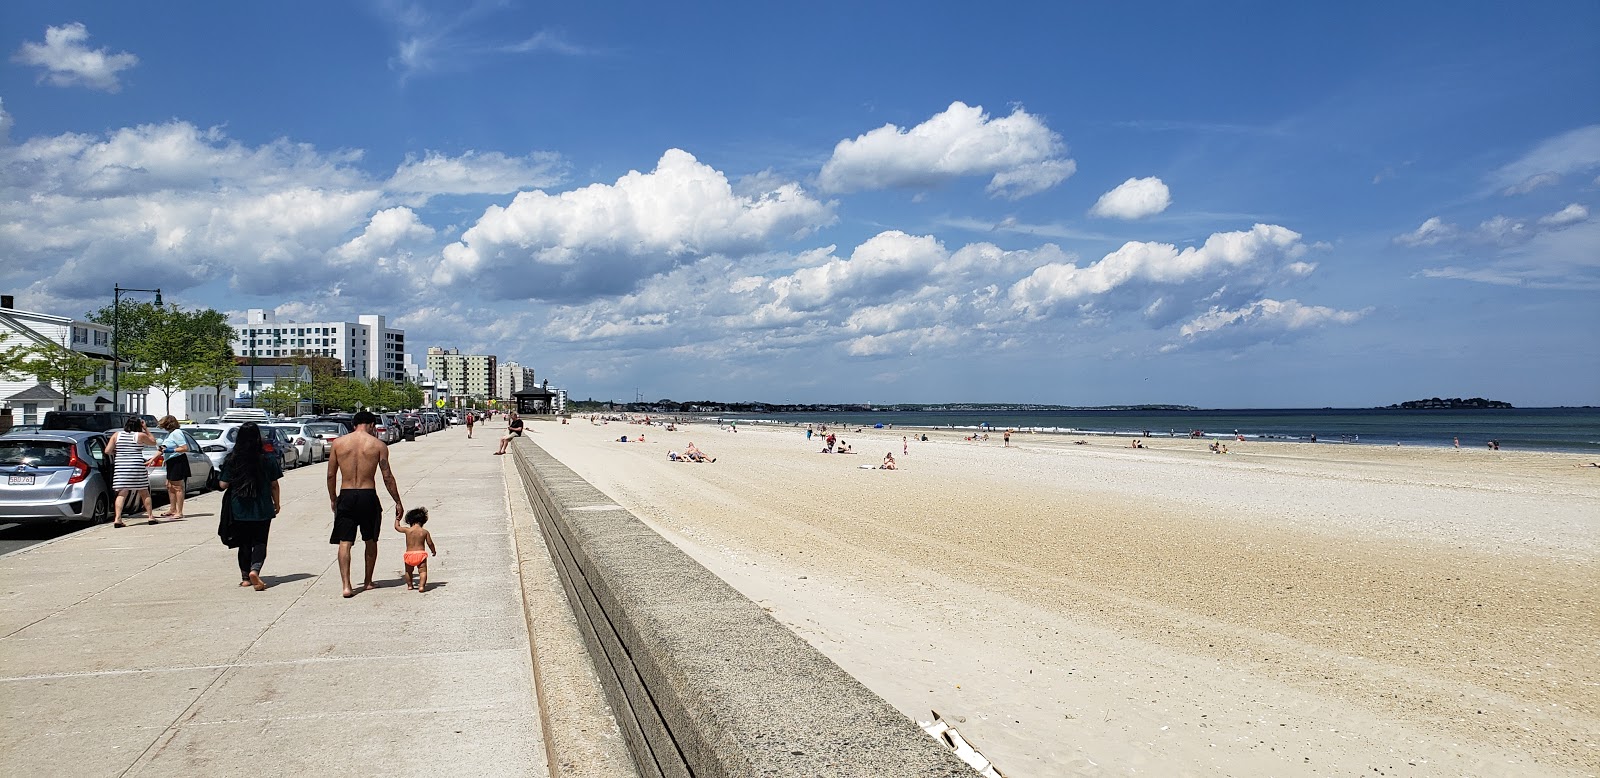 Photo of Revere beach with very clean level of cleanliness